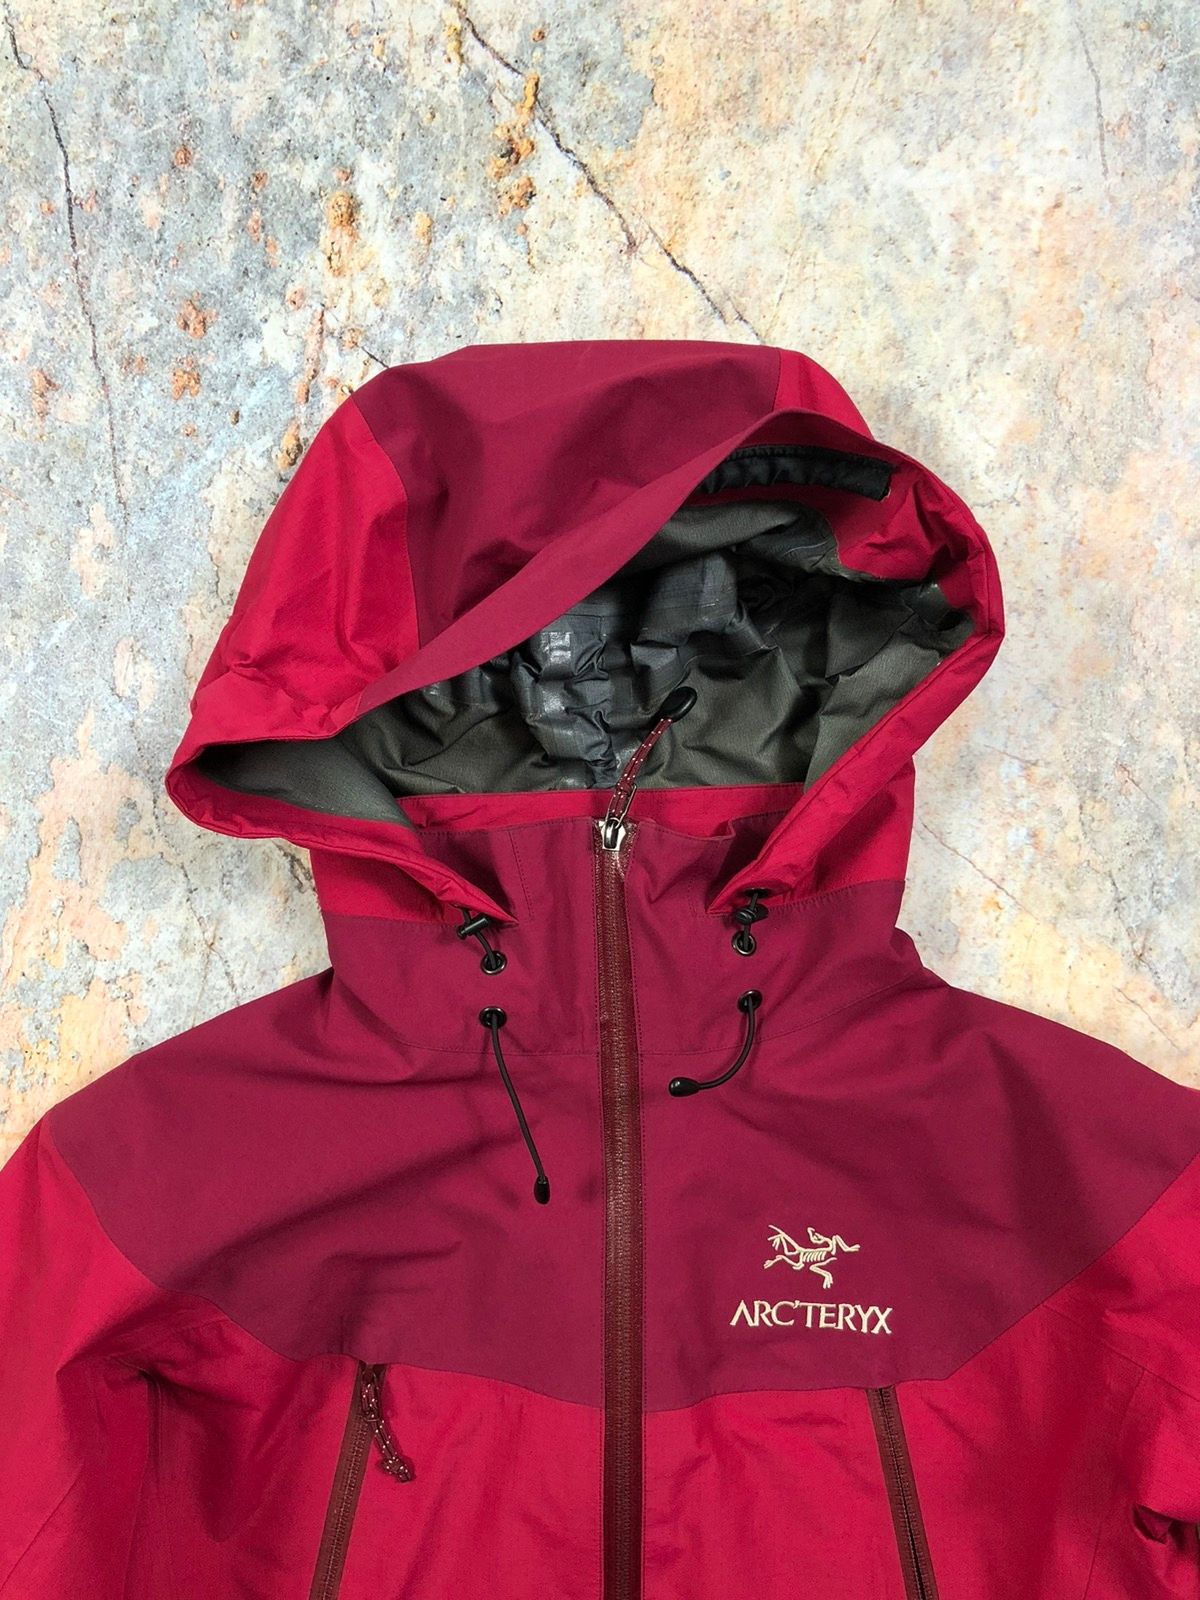 Pre-owned Arc'teryx Red Gore Tex Jacket